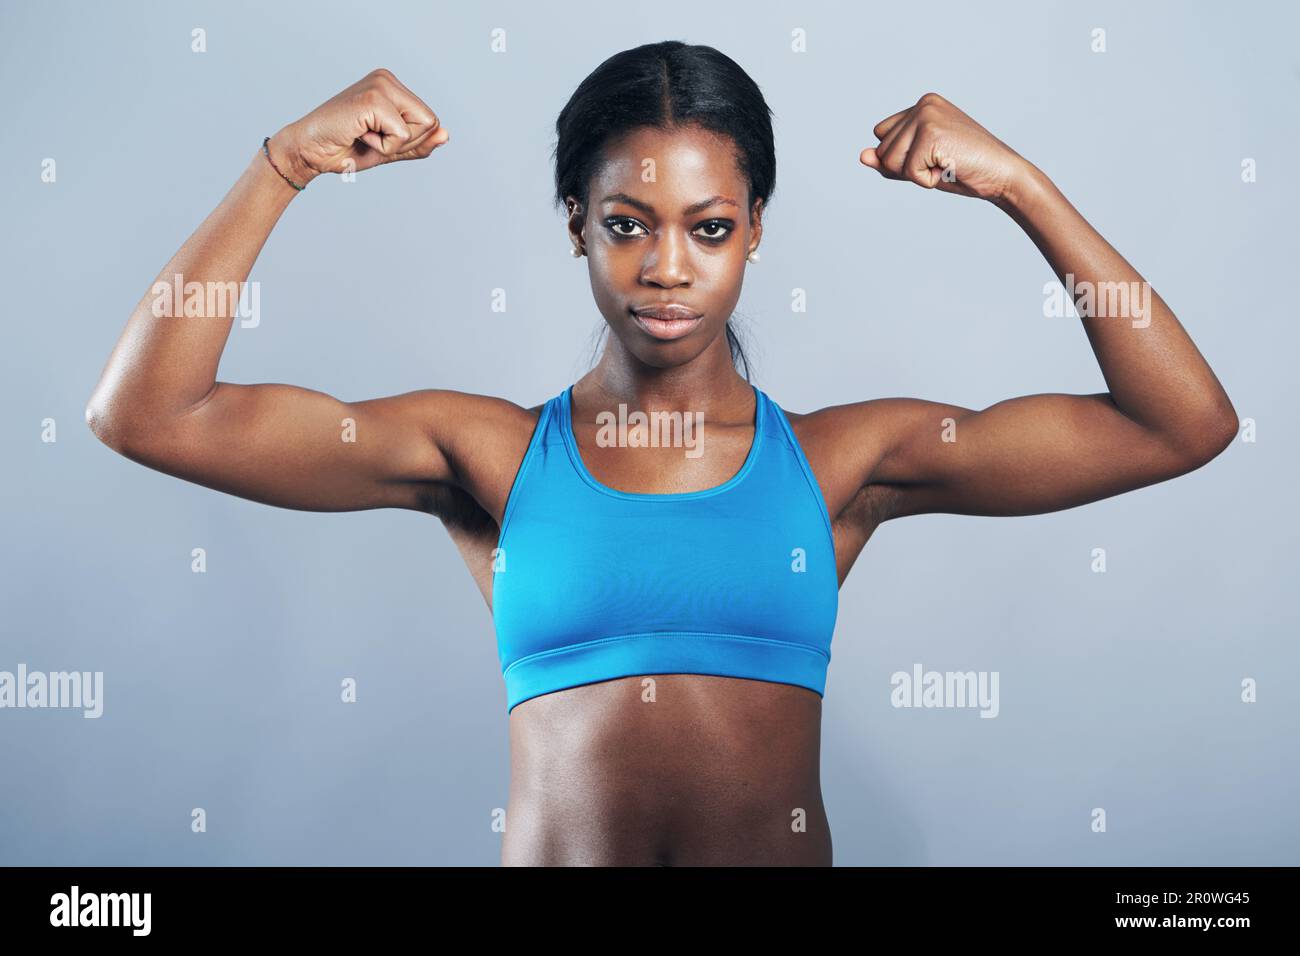 Power, fitness and portrait of black woman flexing arm muscles for